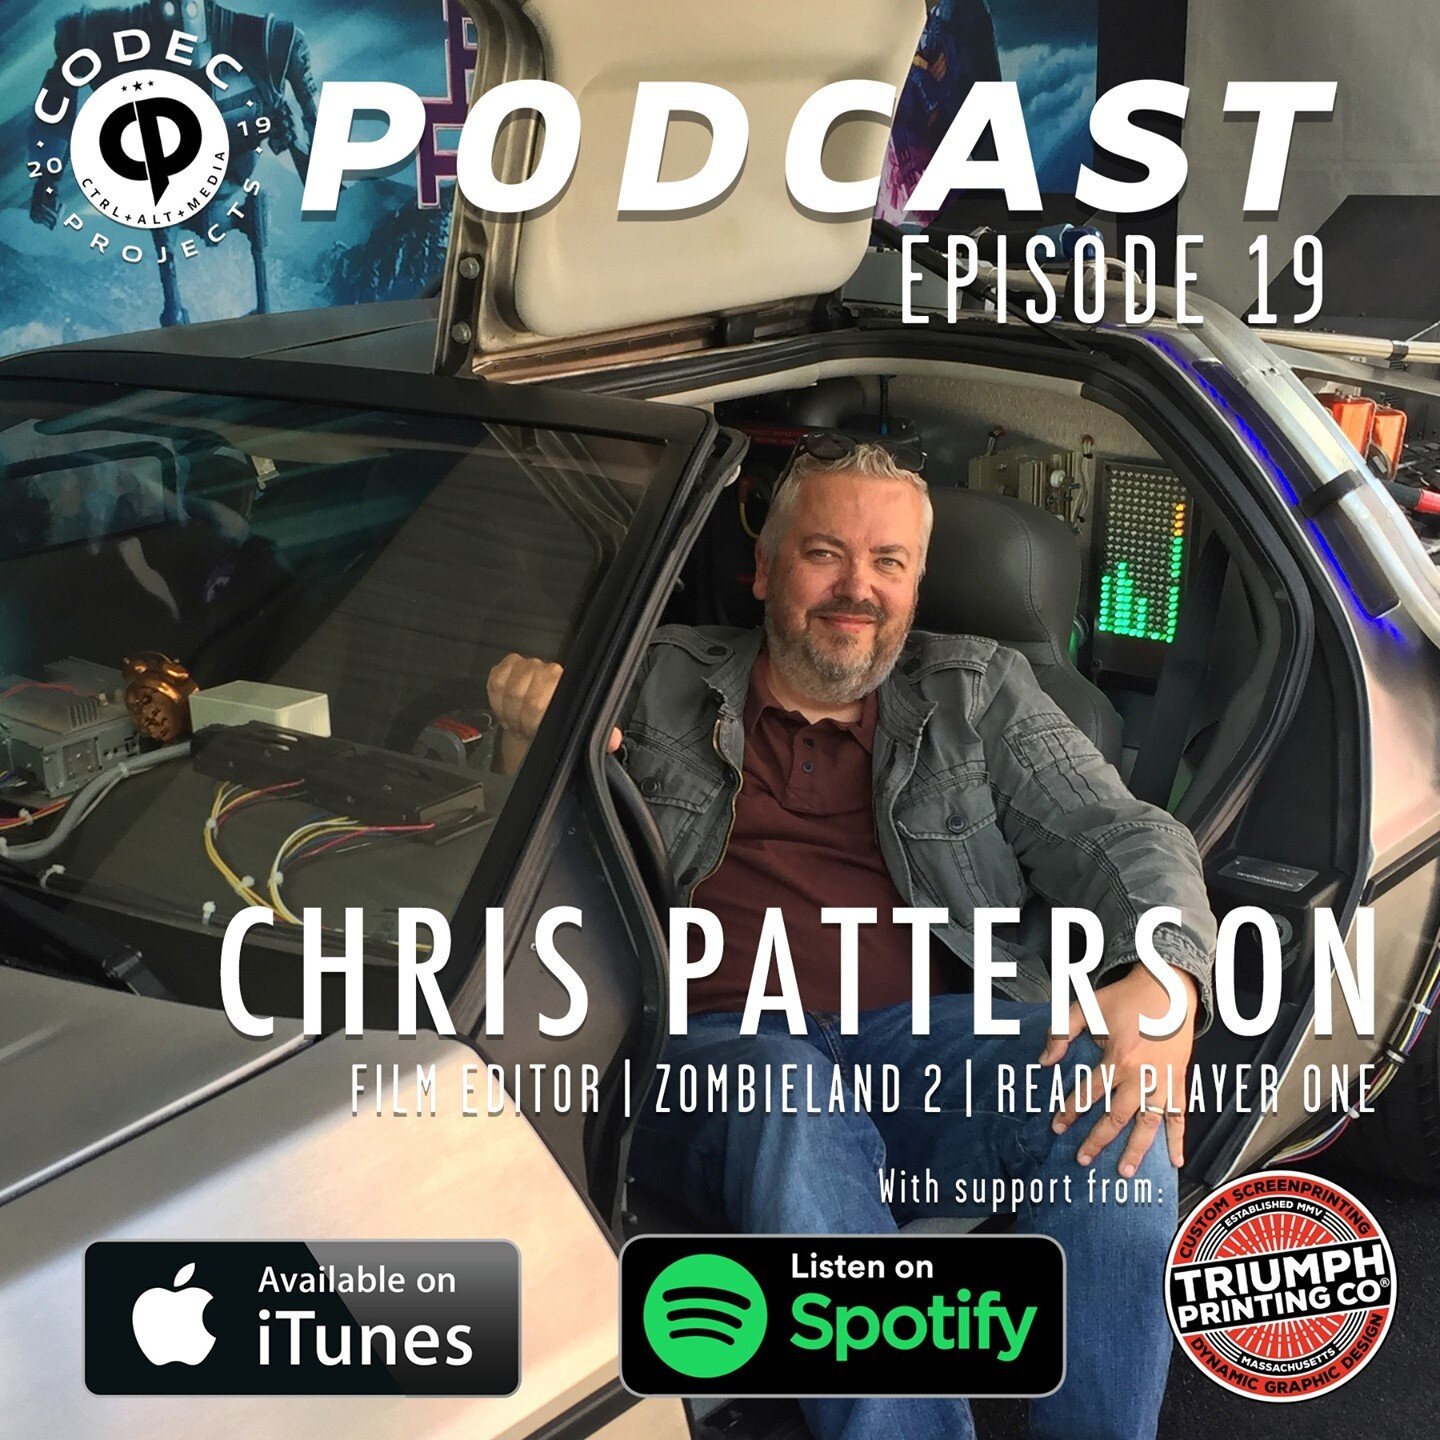 Codec Projects - S1E19 - Chris Patterson | Film Editor | Zombieland 2 | Ready Player One⁠
⁠
We talk about growing up in Boston, getting into punk and hardcore, working as a feature film editor, working with Steven Spielberg, and there&rsquo;s also qu